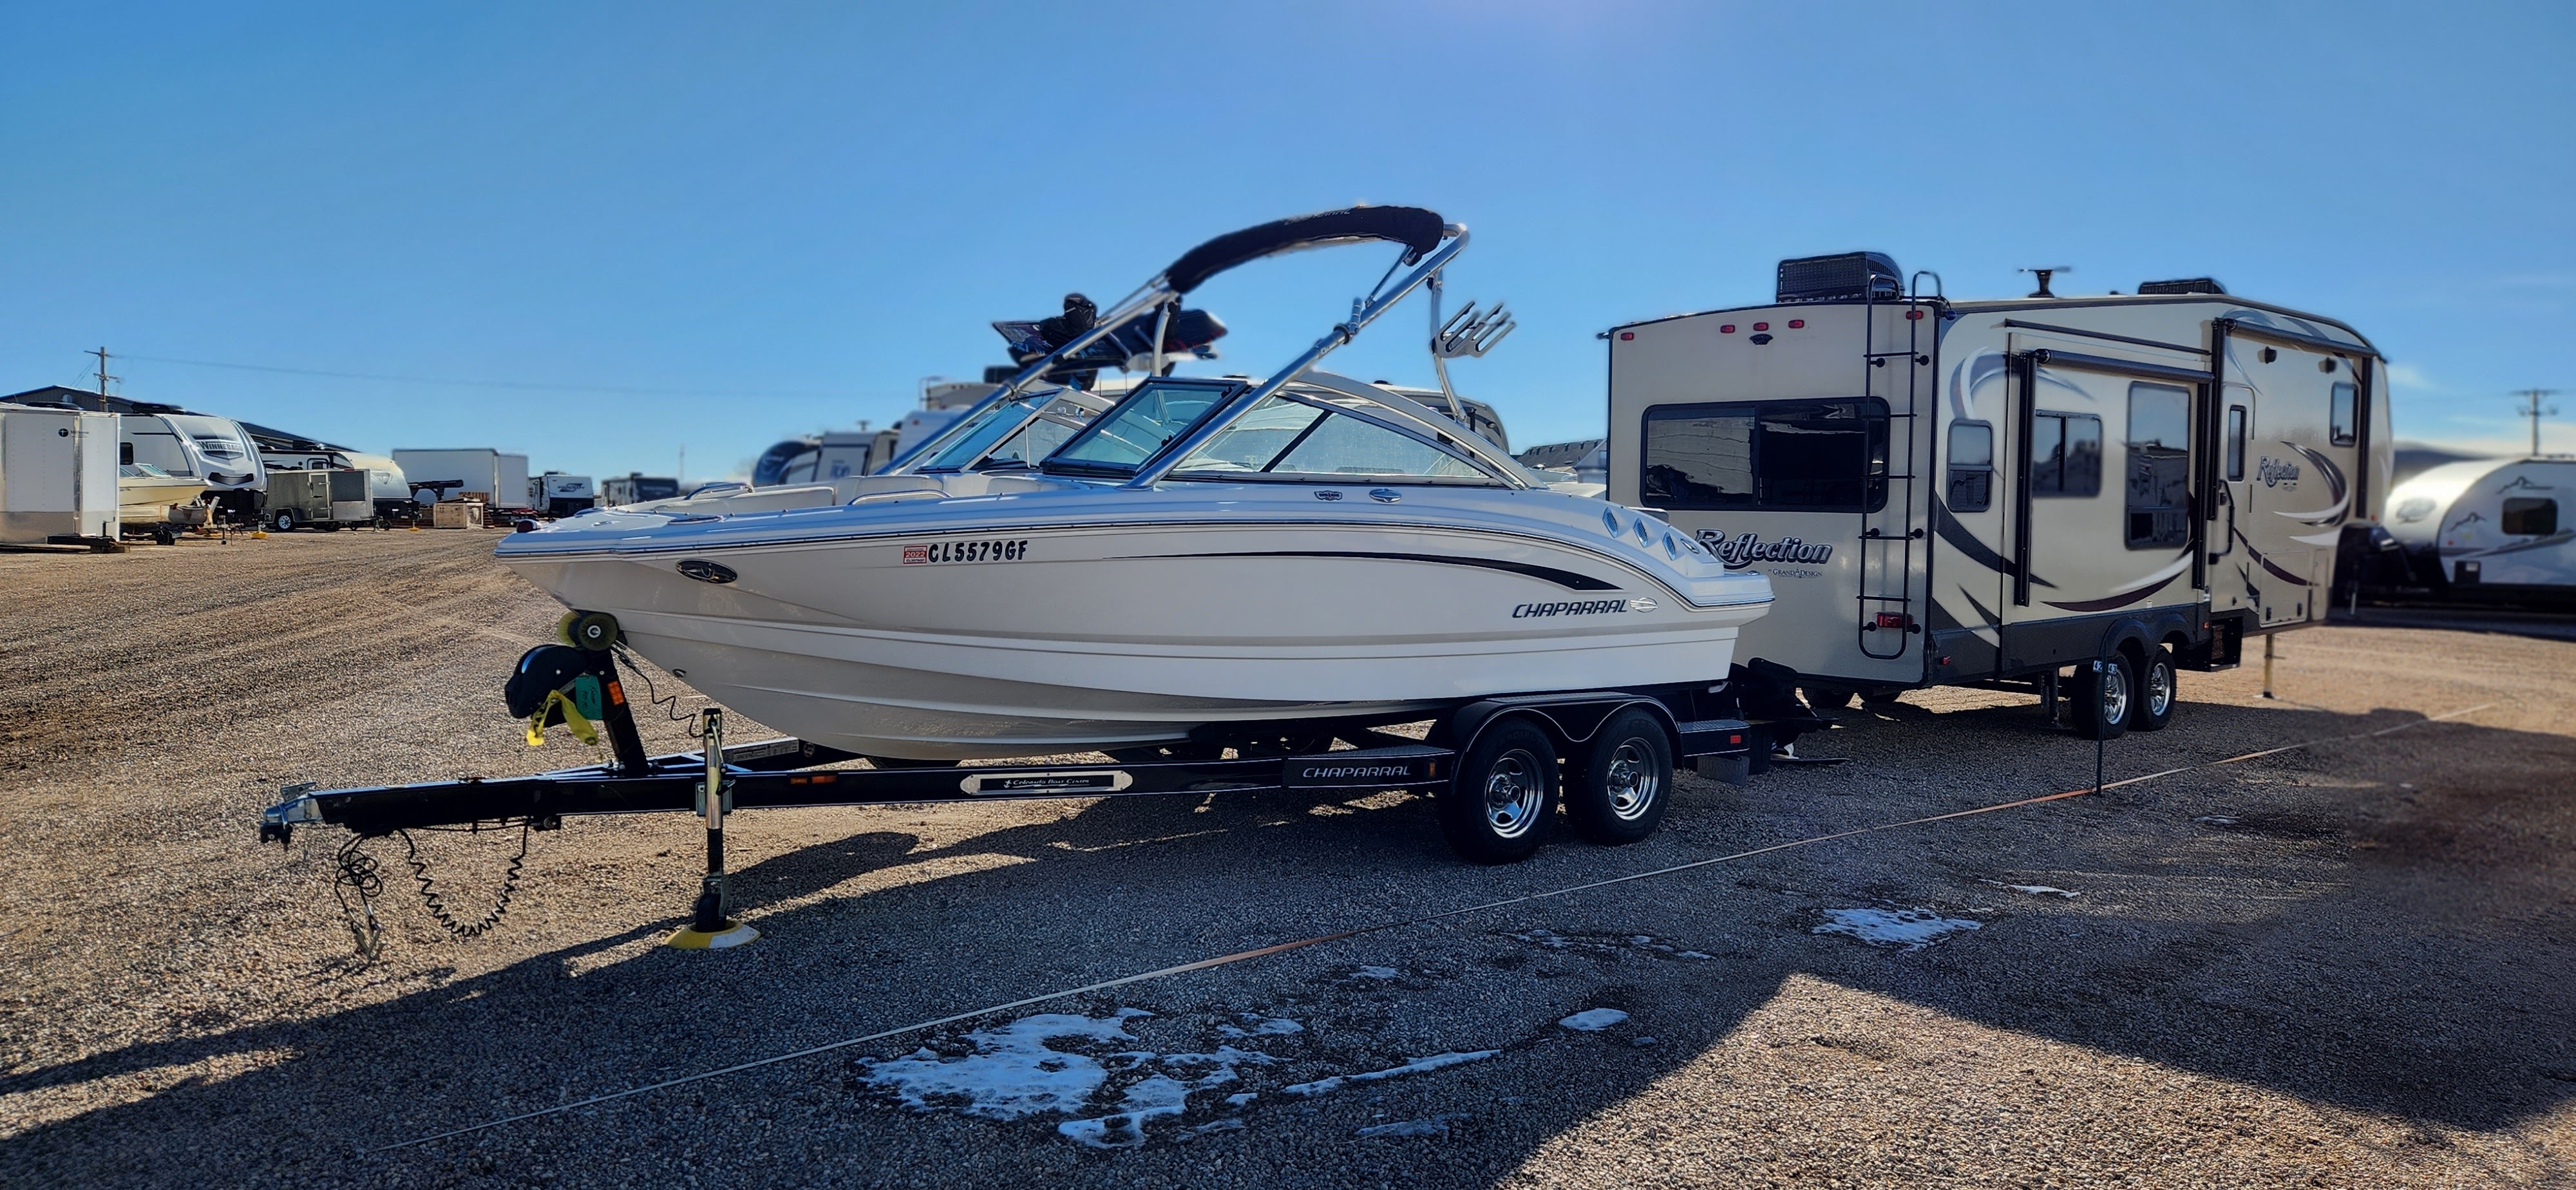 2013 Chaparral SSI 206 Power boat for sale in Brighton, CO - image 1 